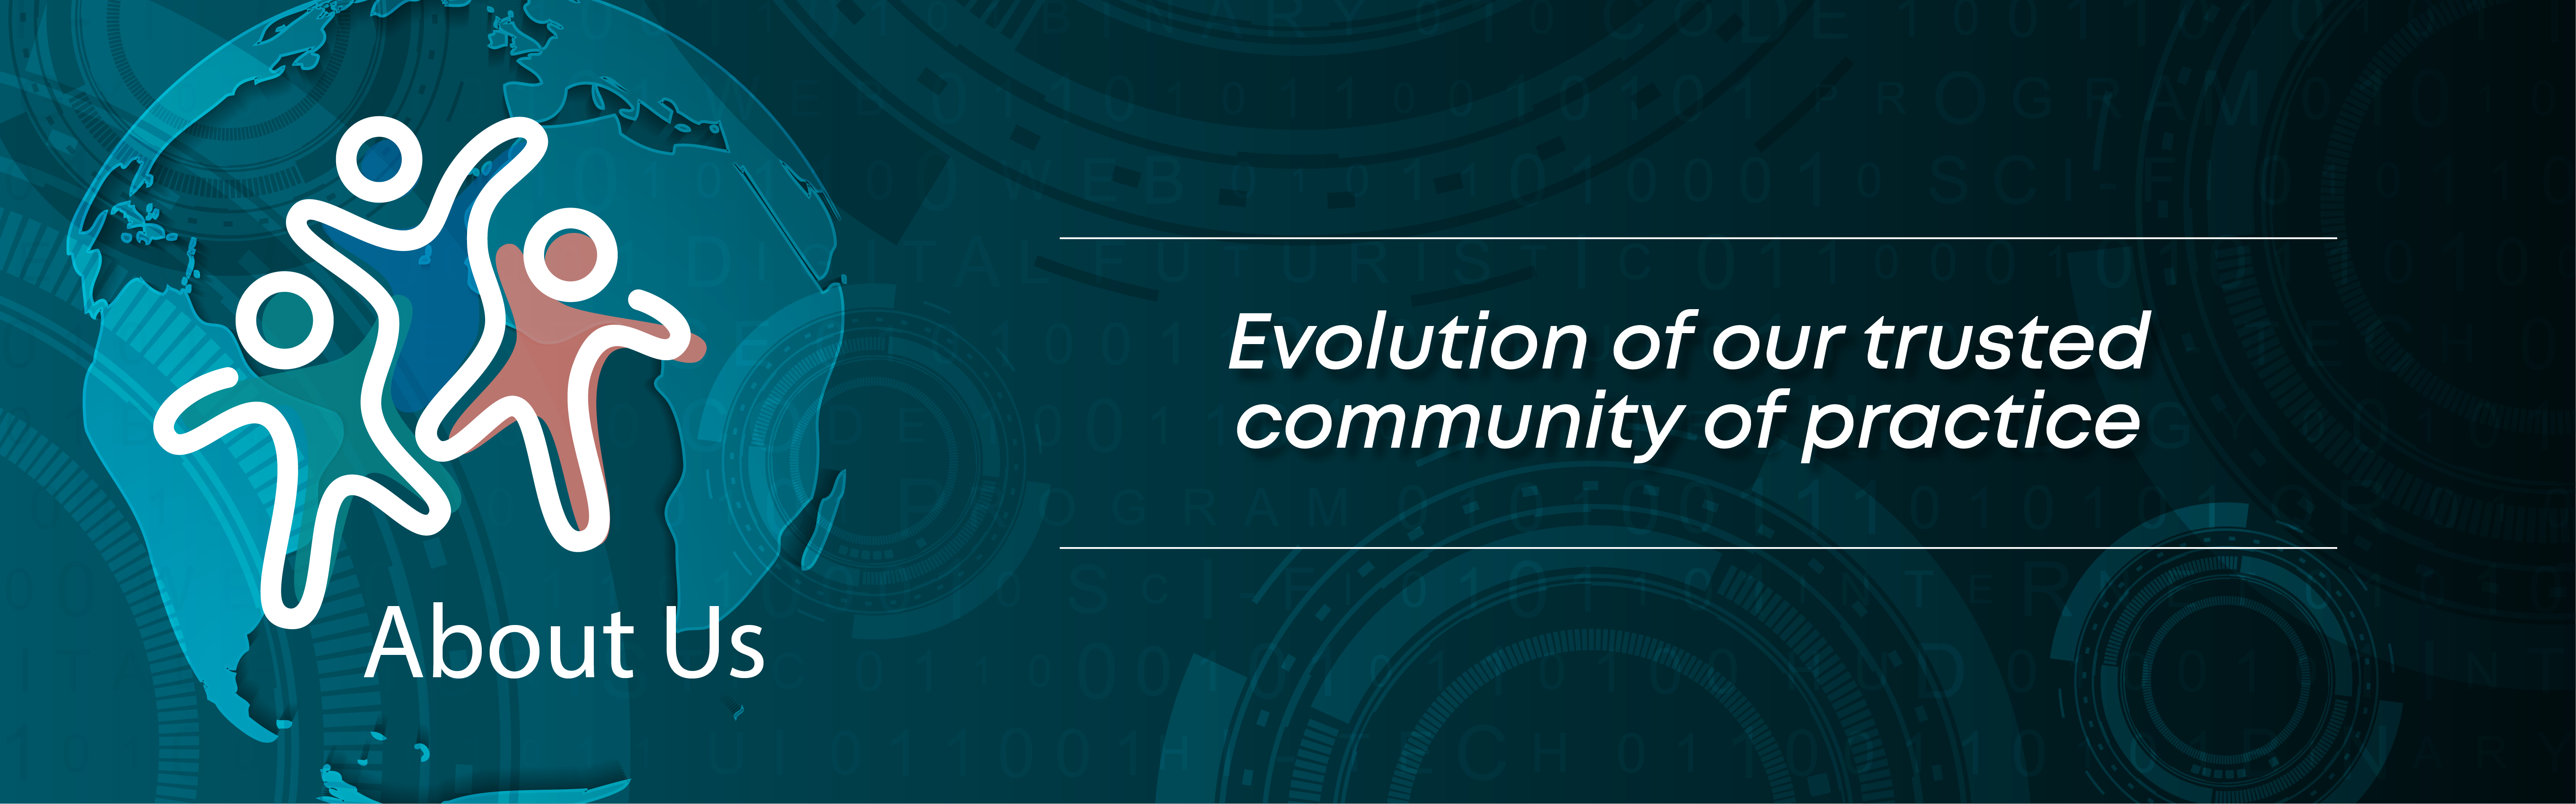 Banner About Us Evolution of Our Trusted Community of Practice